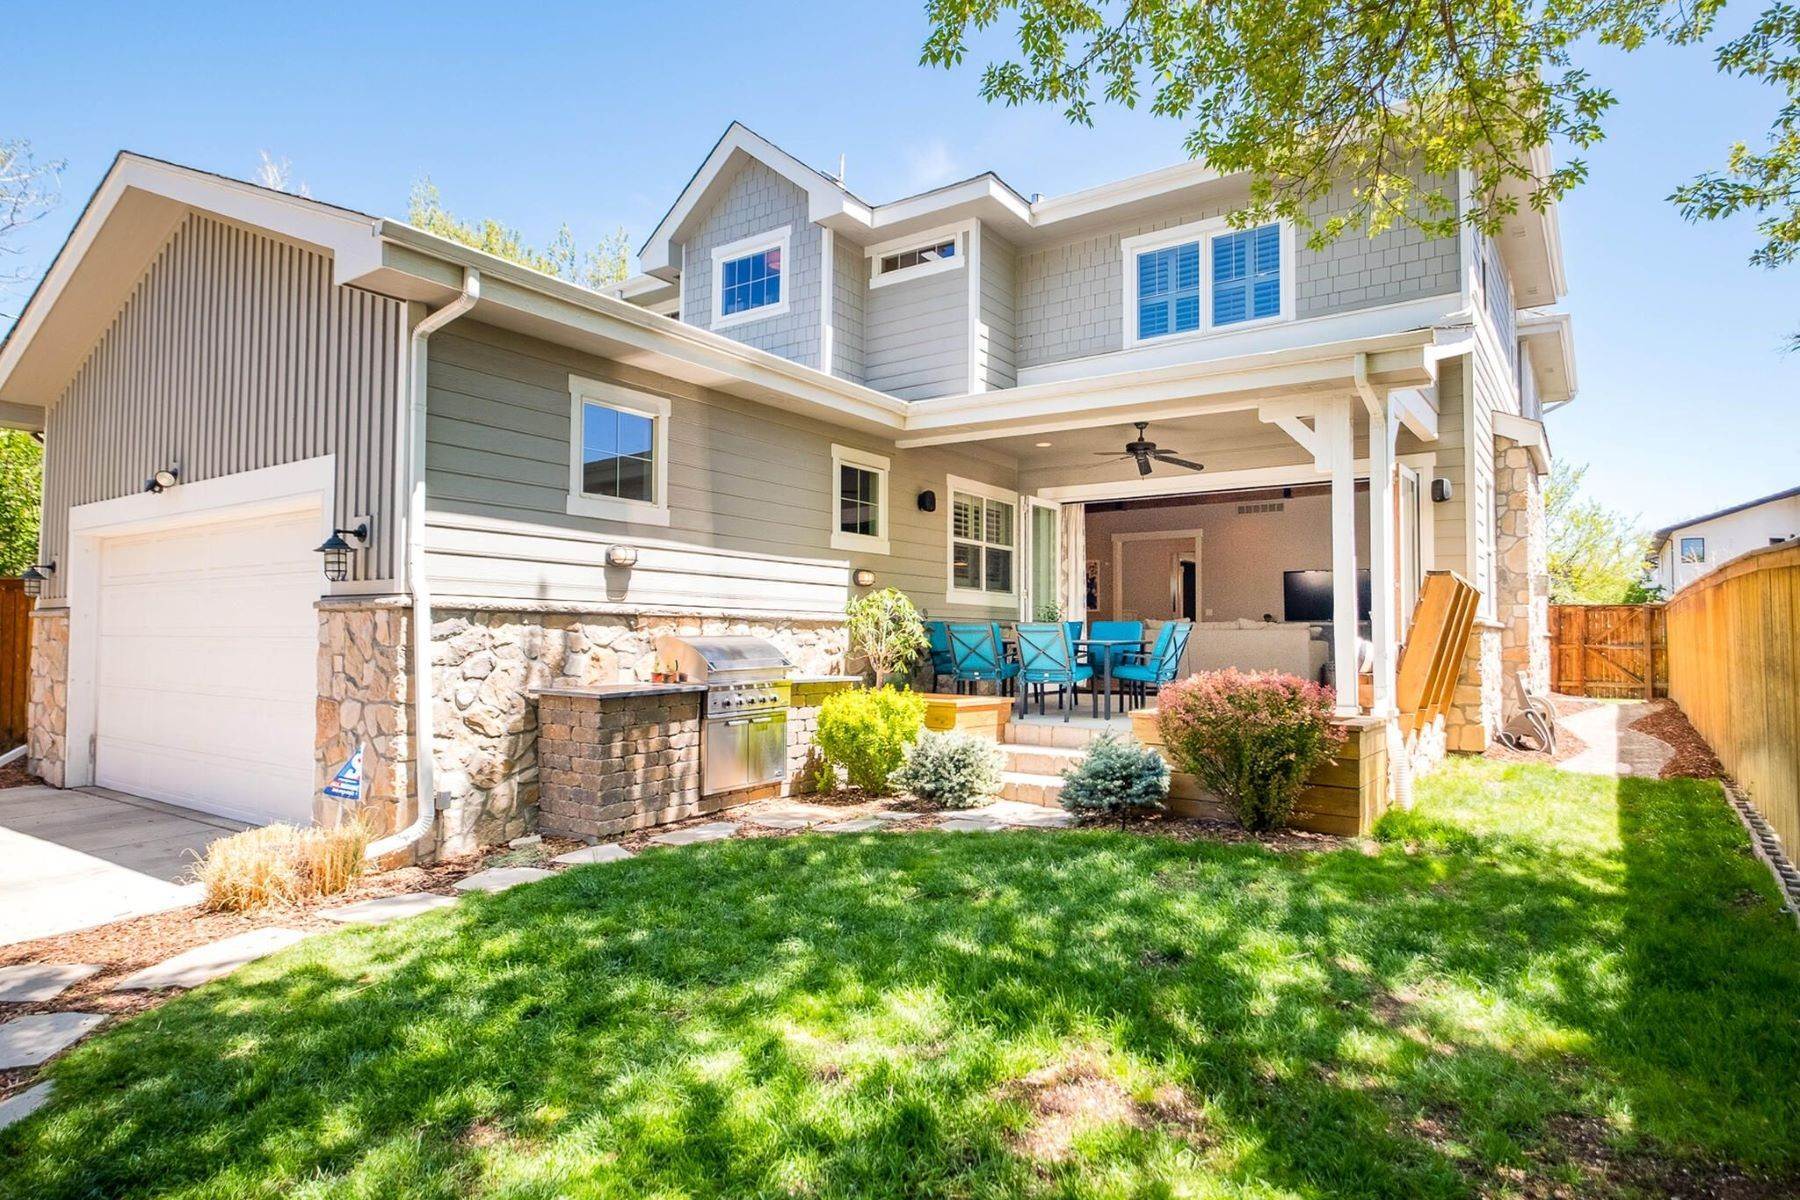 35. Single Family Homes for Active at 2541 S Madison Street, Denver, CO, 80210 2541 S Madison Street Denver, Colorado 80210 United States